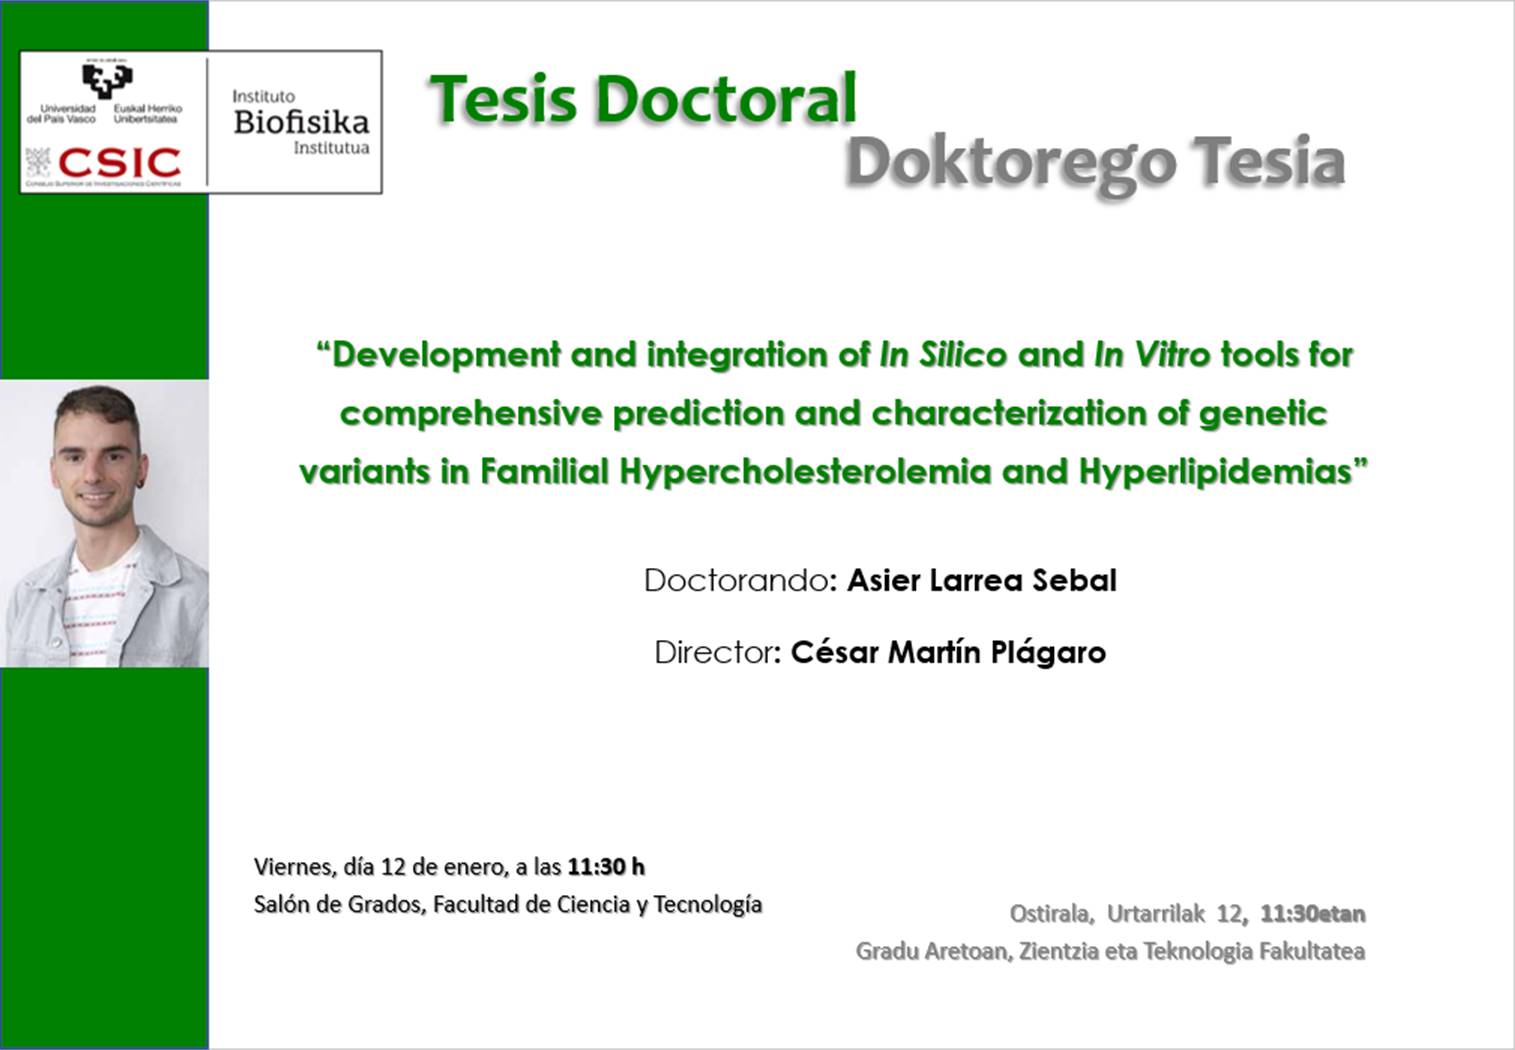 IBF Doctoral Thesis: “Development and integration of In Silico and In Vitro tools for comprehensive prediction and characterization of genetic variants in Familial Hypercholesterolemia and Hyperlipidemias”